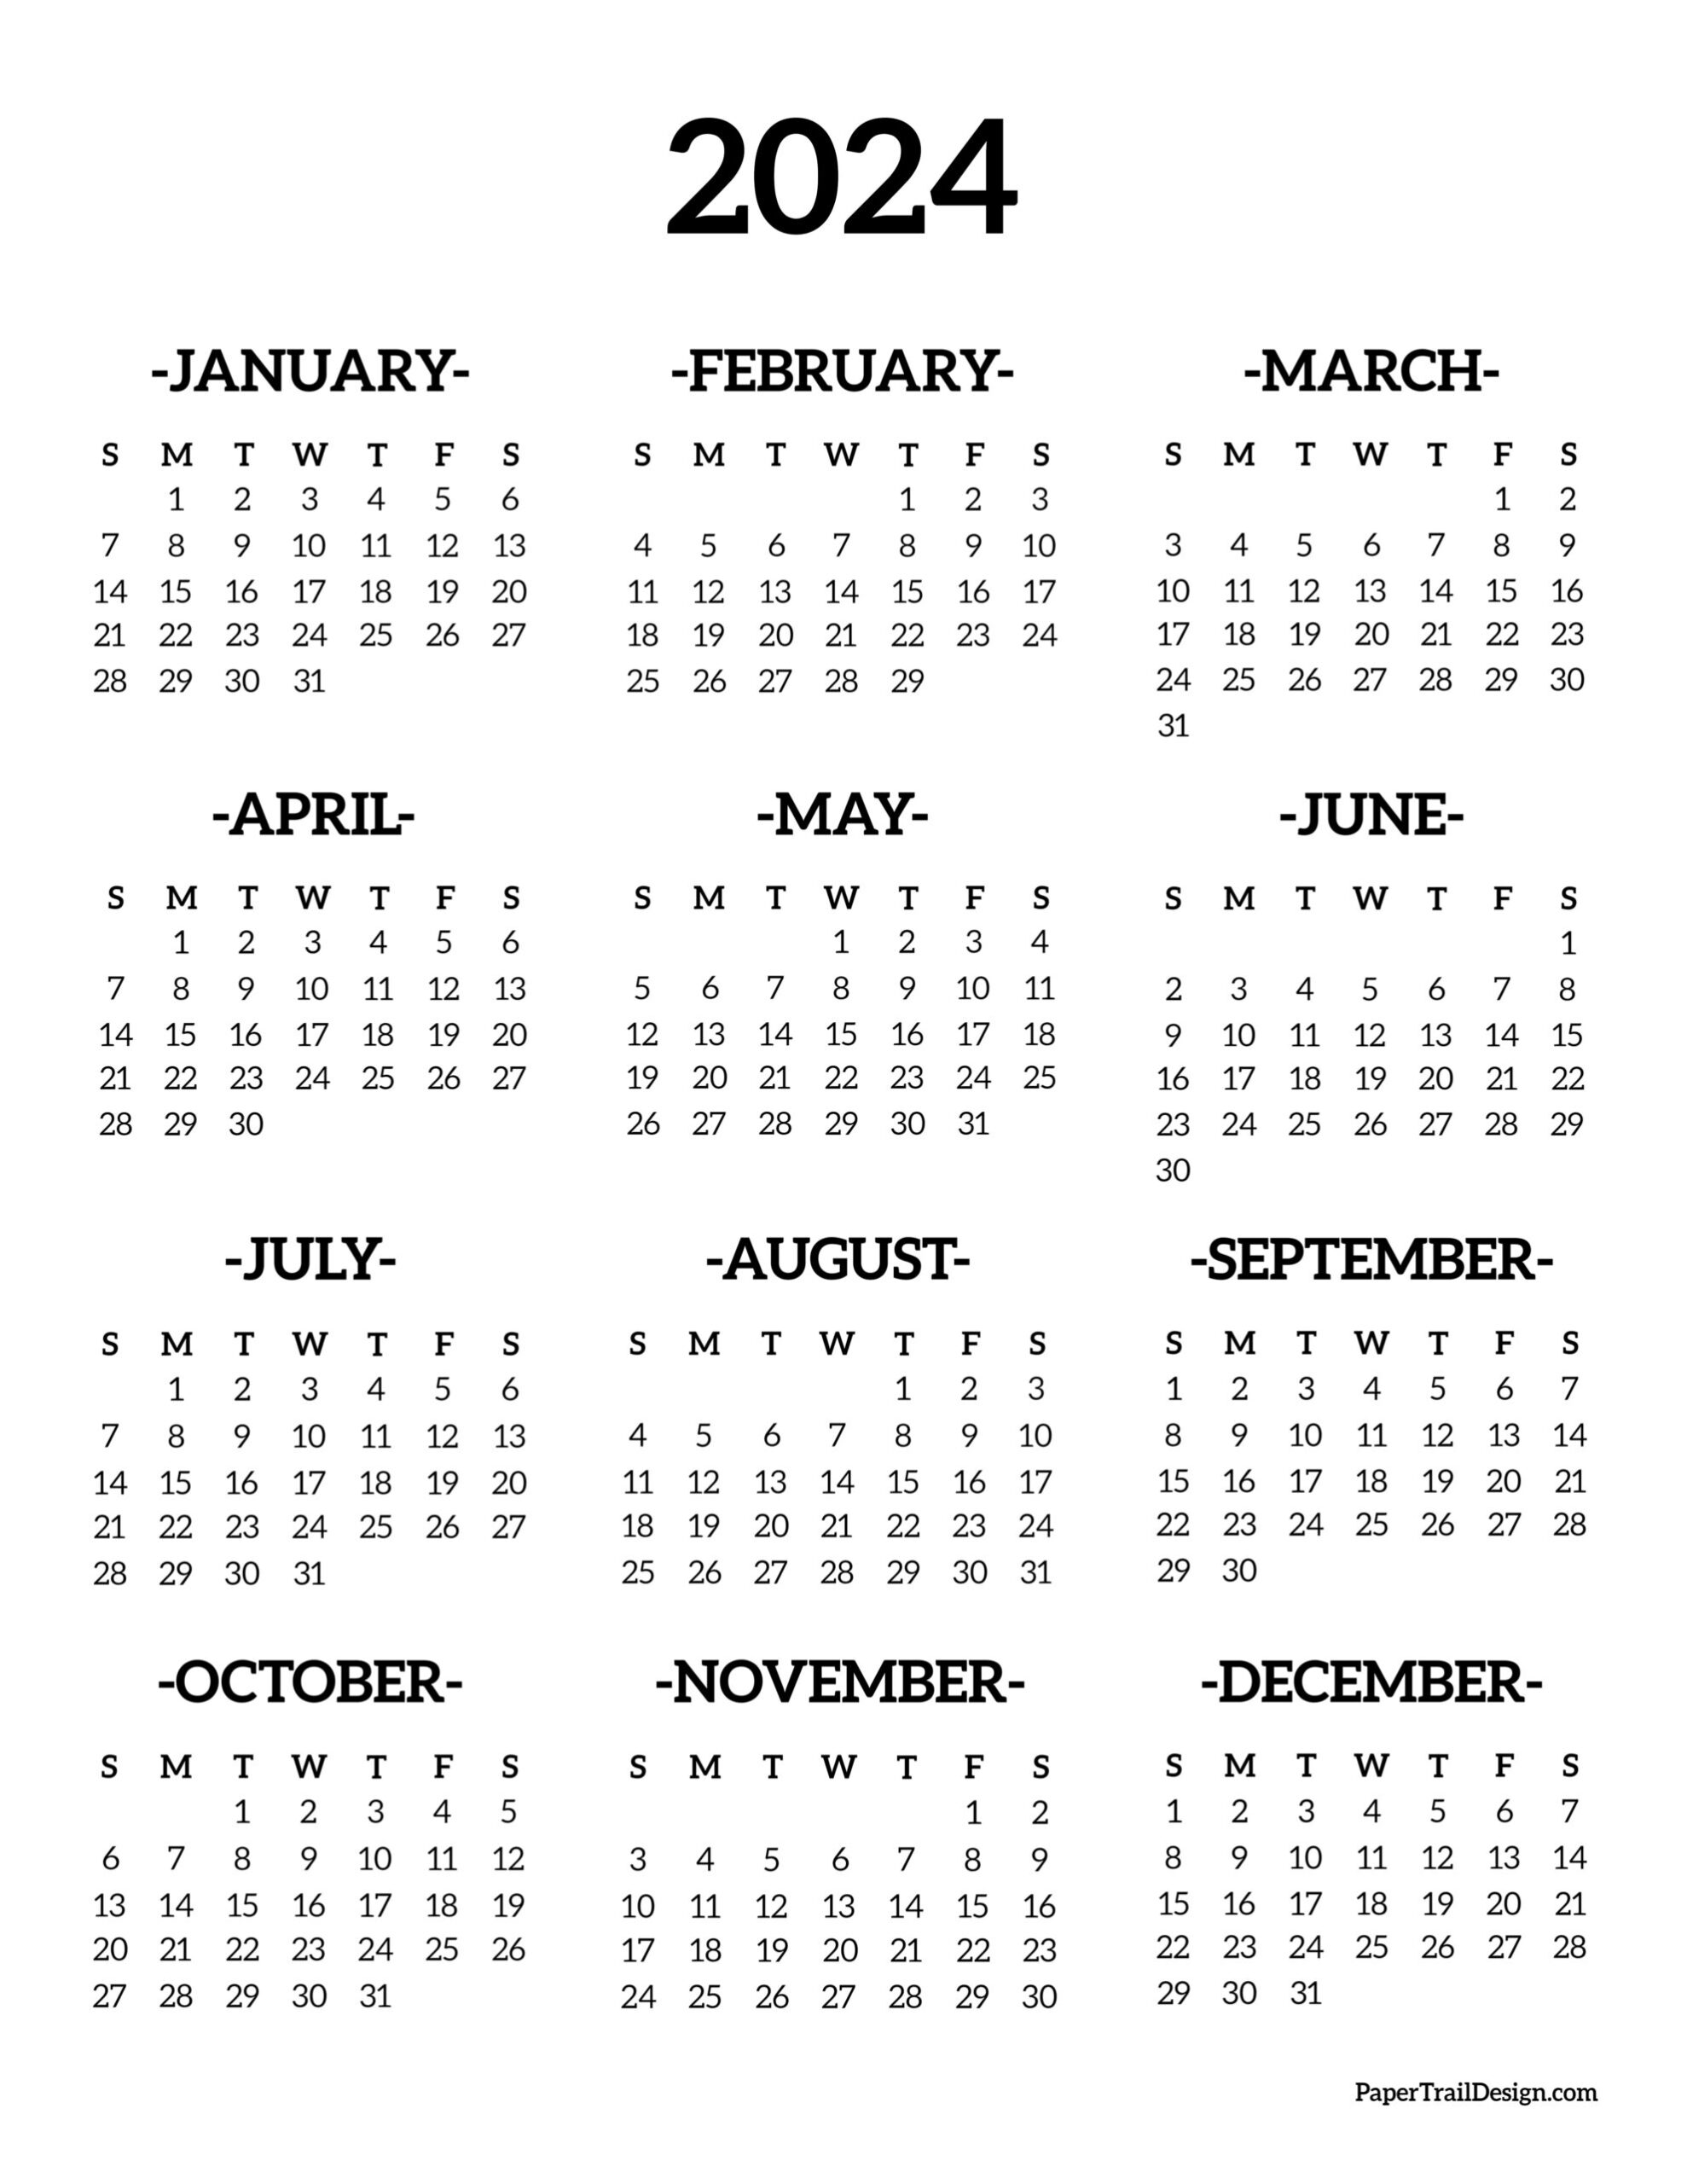 Calendar 2024 Printable One Page - Paper Trail Design for Calendar 2024 Year Printable